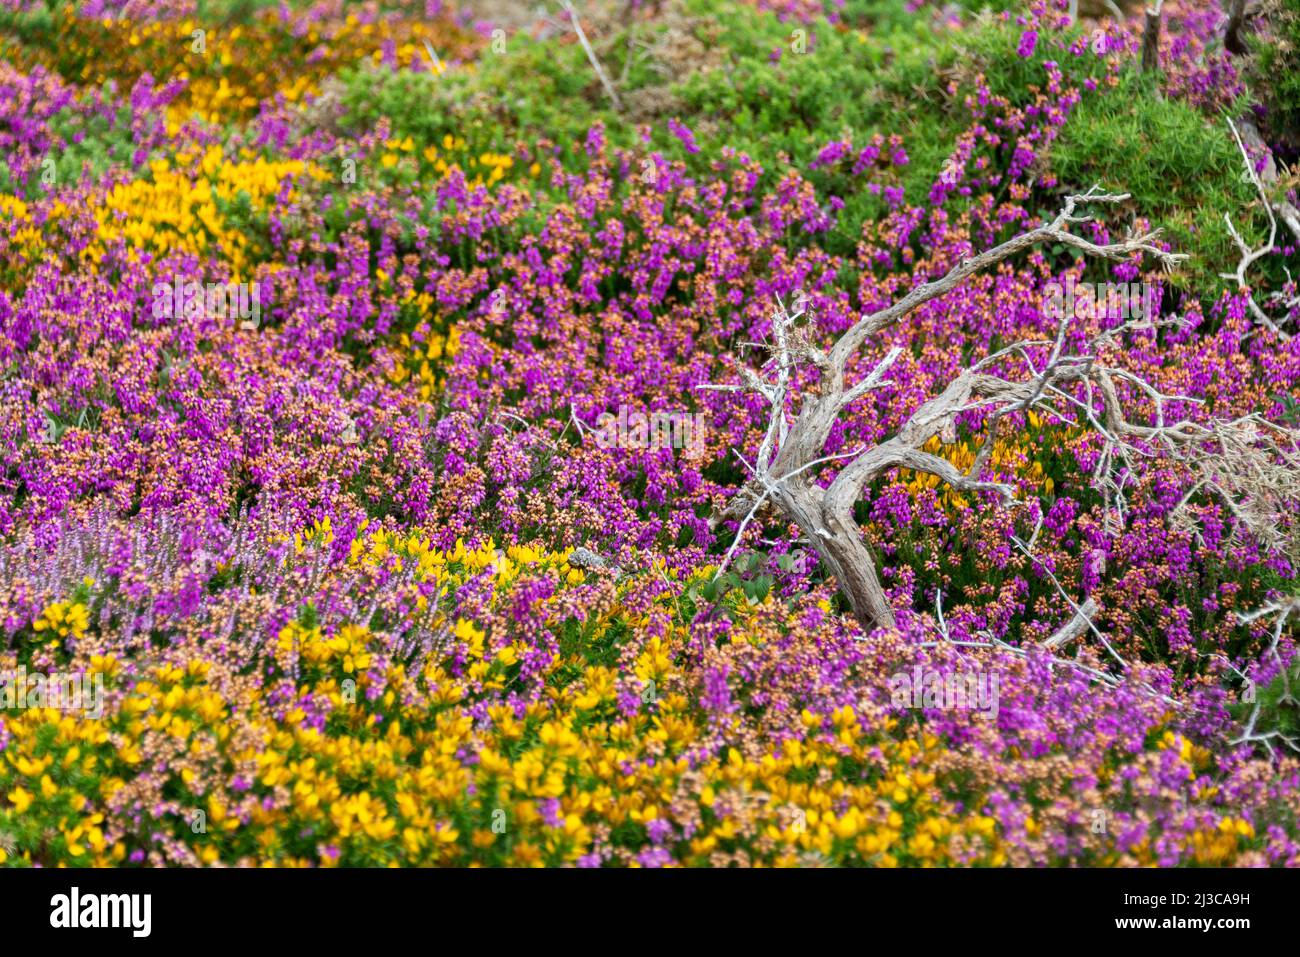 Pink heather flowers and yellow broom in the moor in Brittany, France Stock Photo